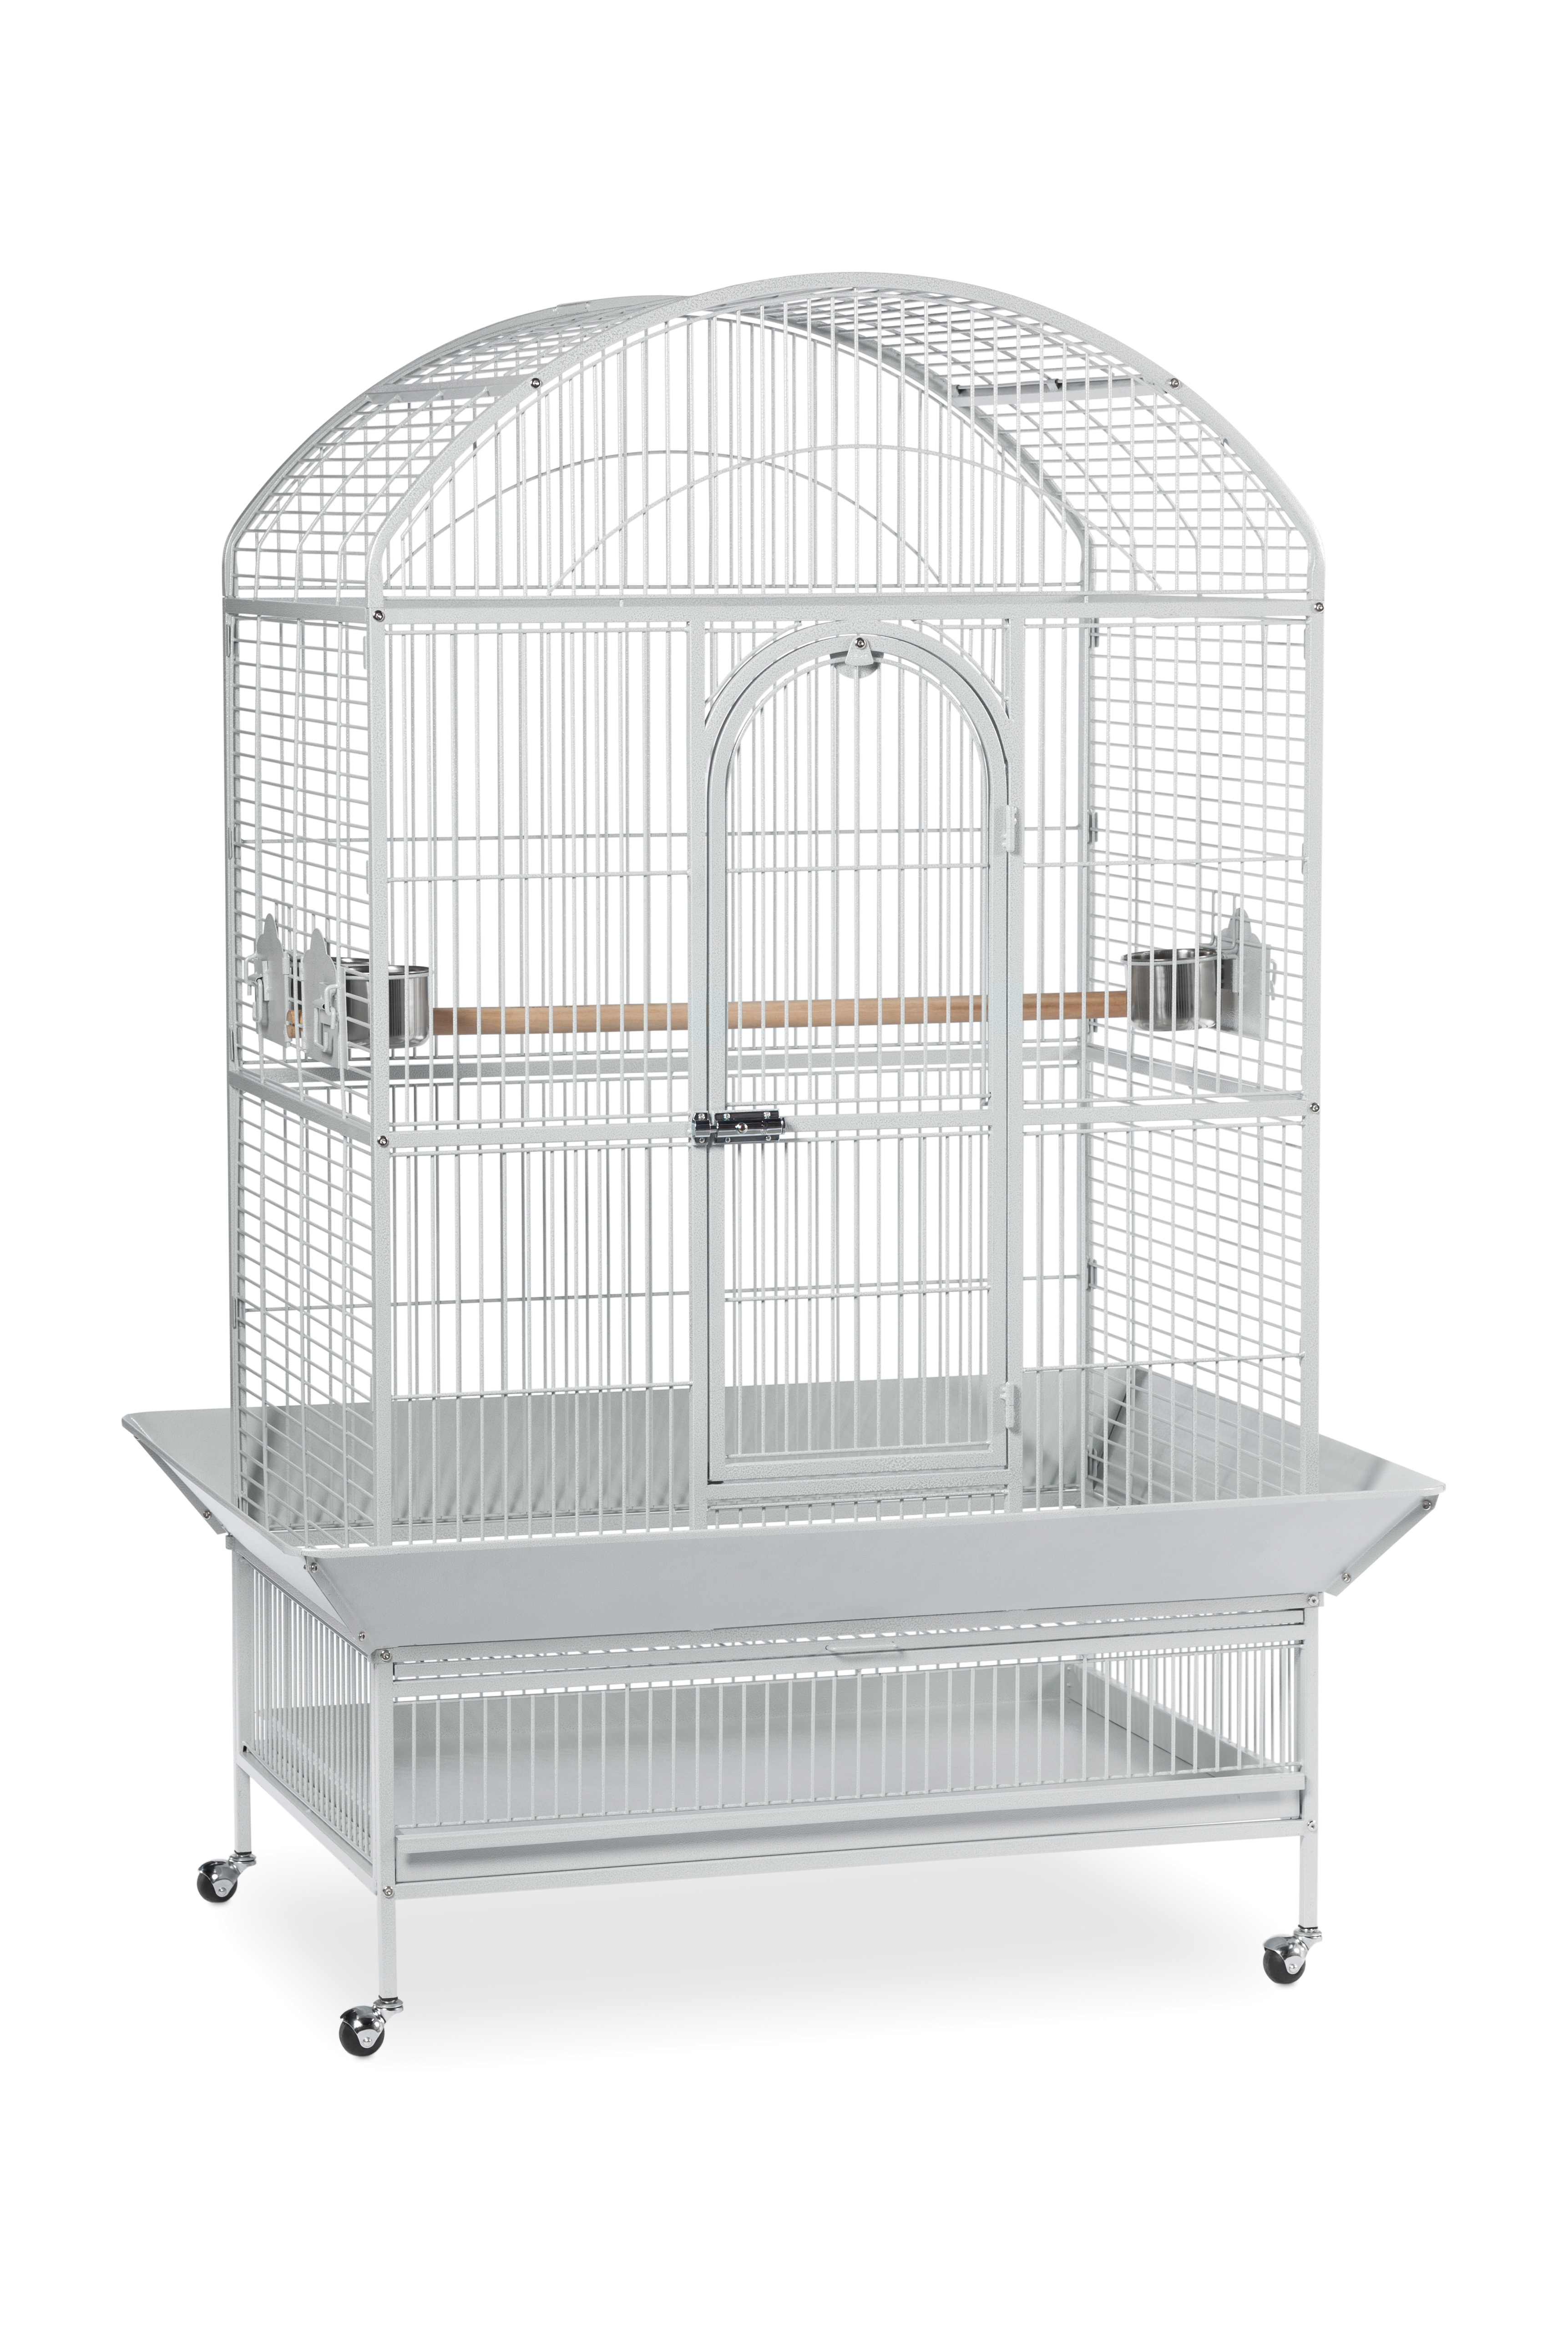 Largest Prevue Dome Top Bird Cage ( 3163) featres